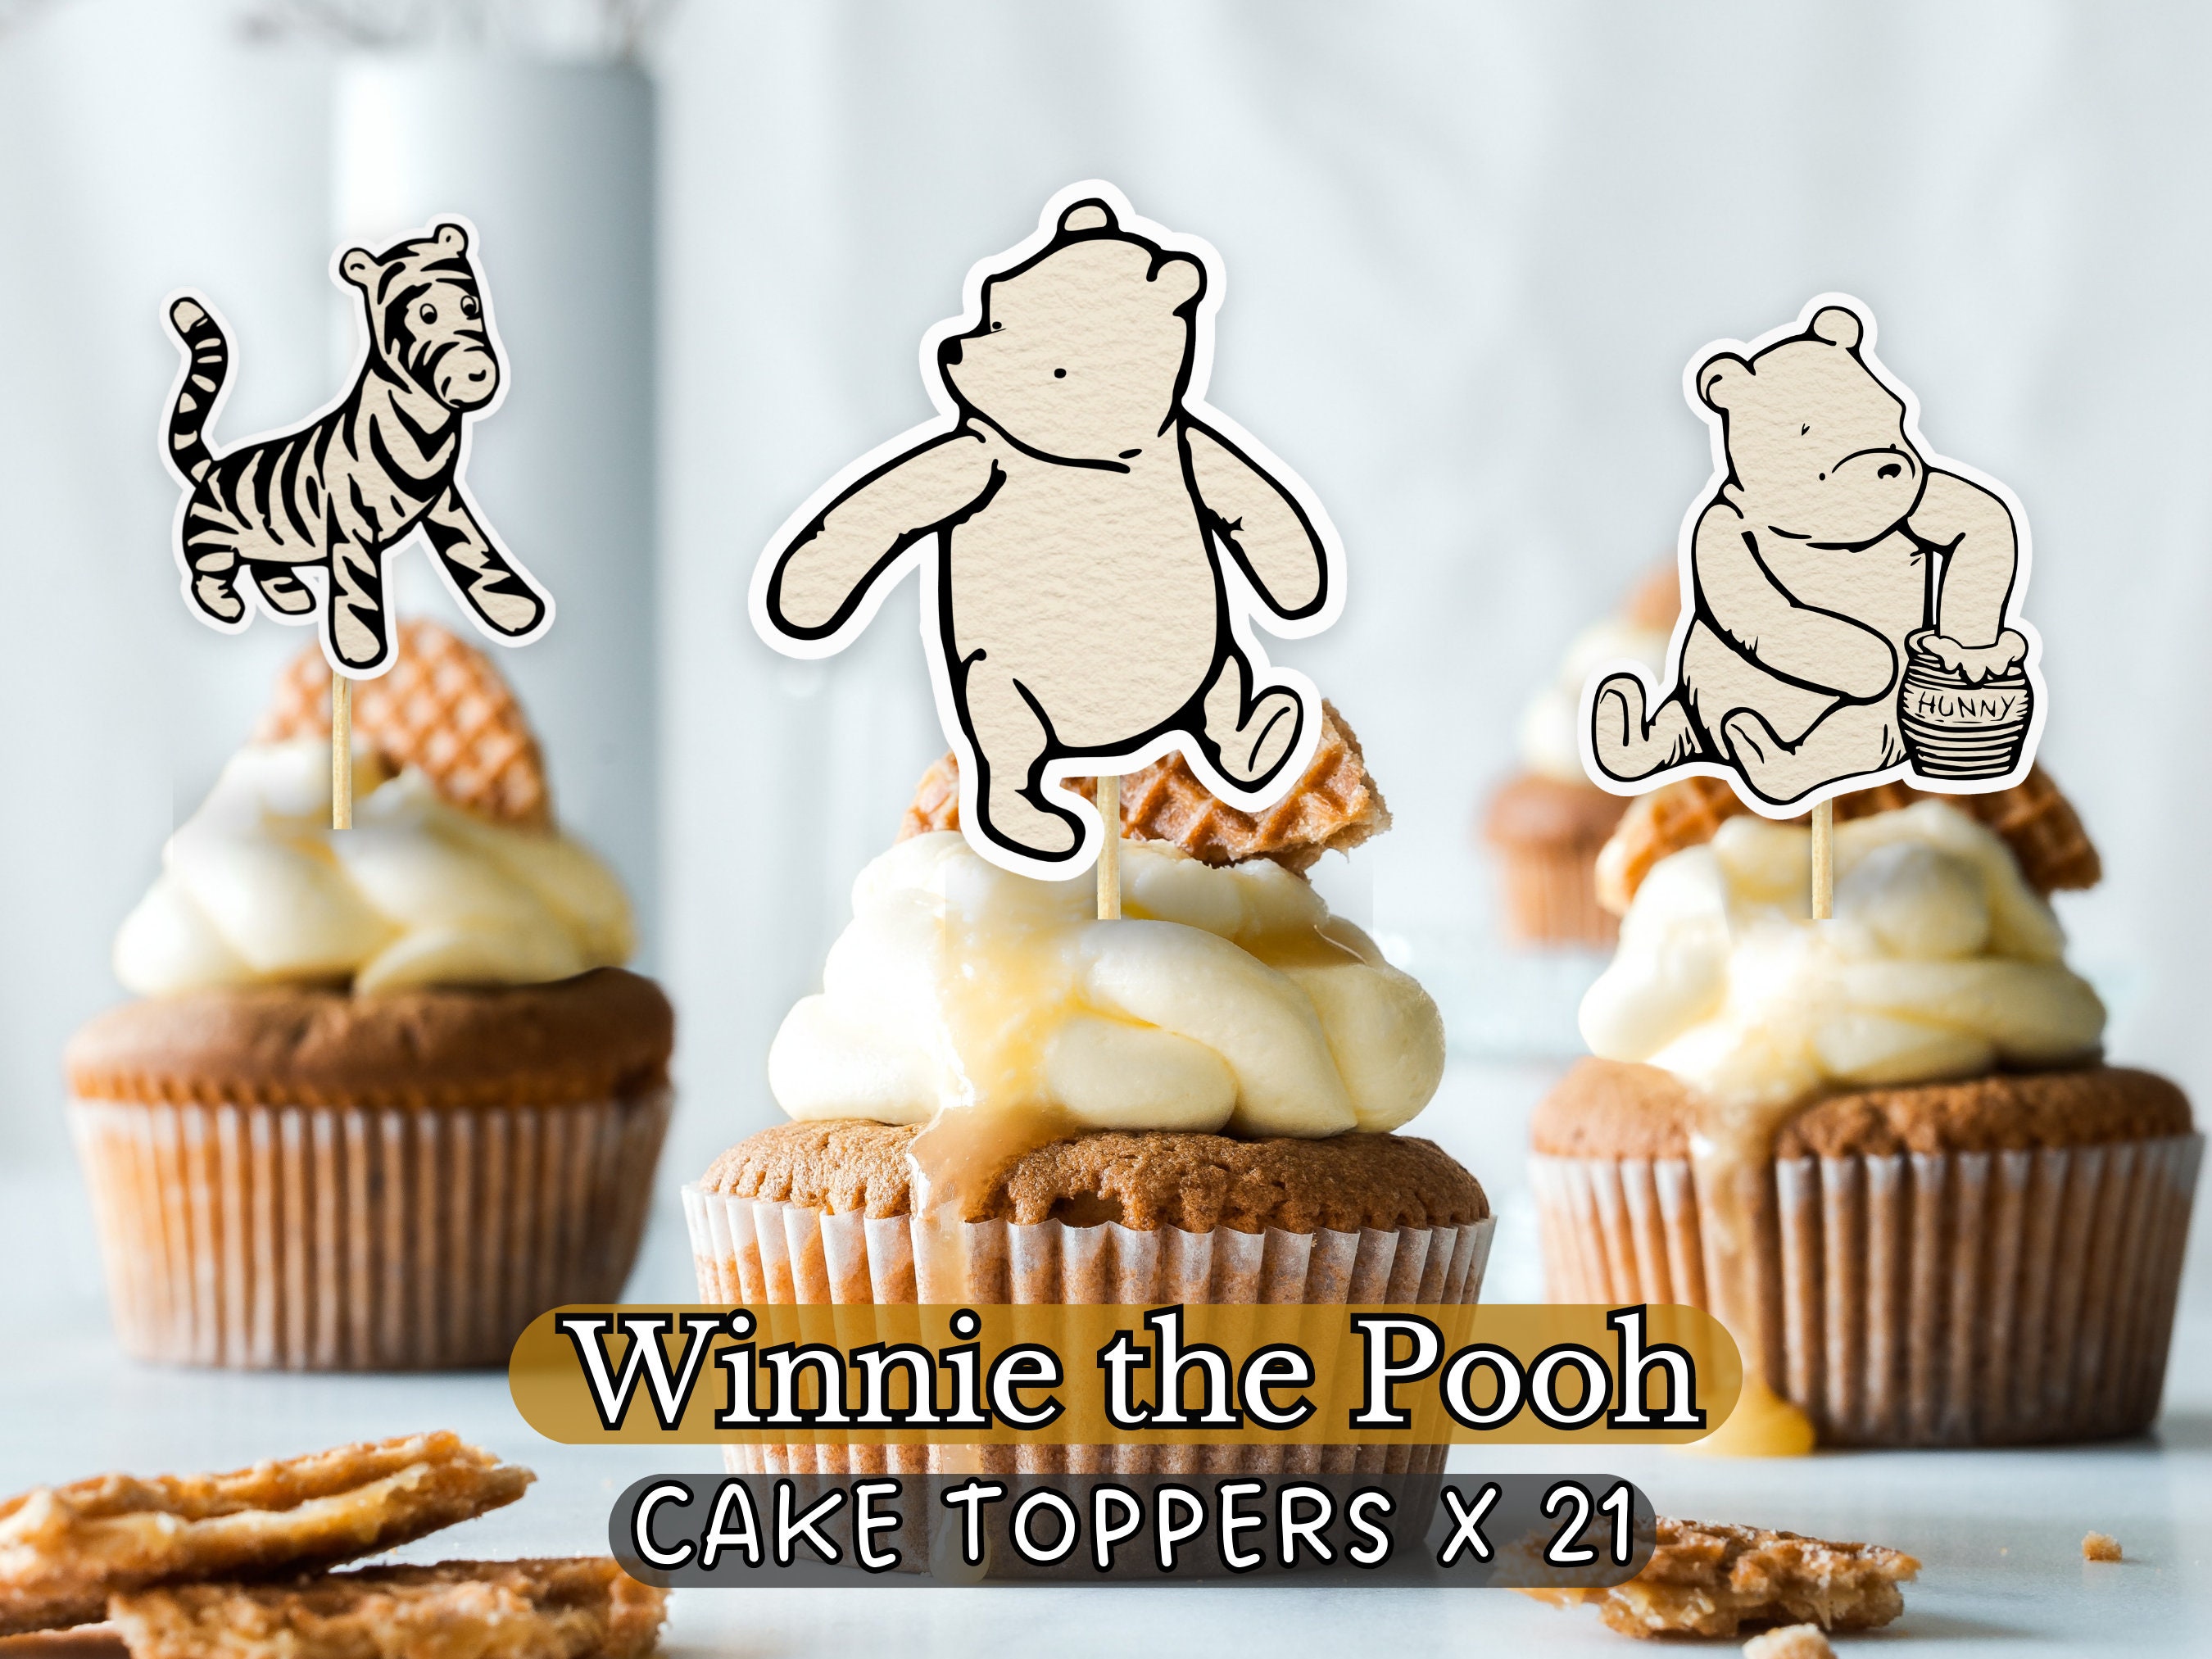 25 Pcs Pink Classic Winnie Cake Topper with Cupcake Toppers for The pooh  Baby Shower Decorations and Winnie Cake Decorations Birthday Party Supplies